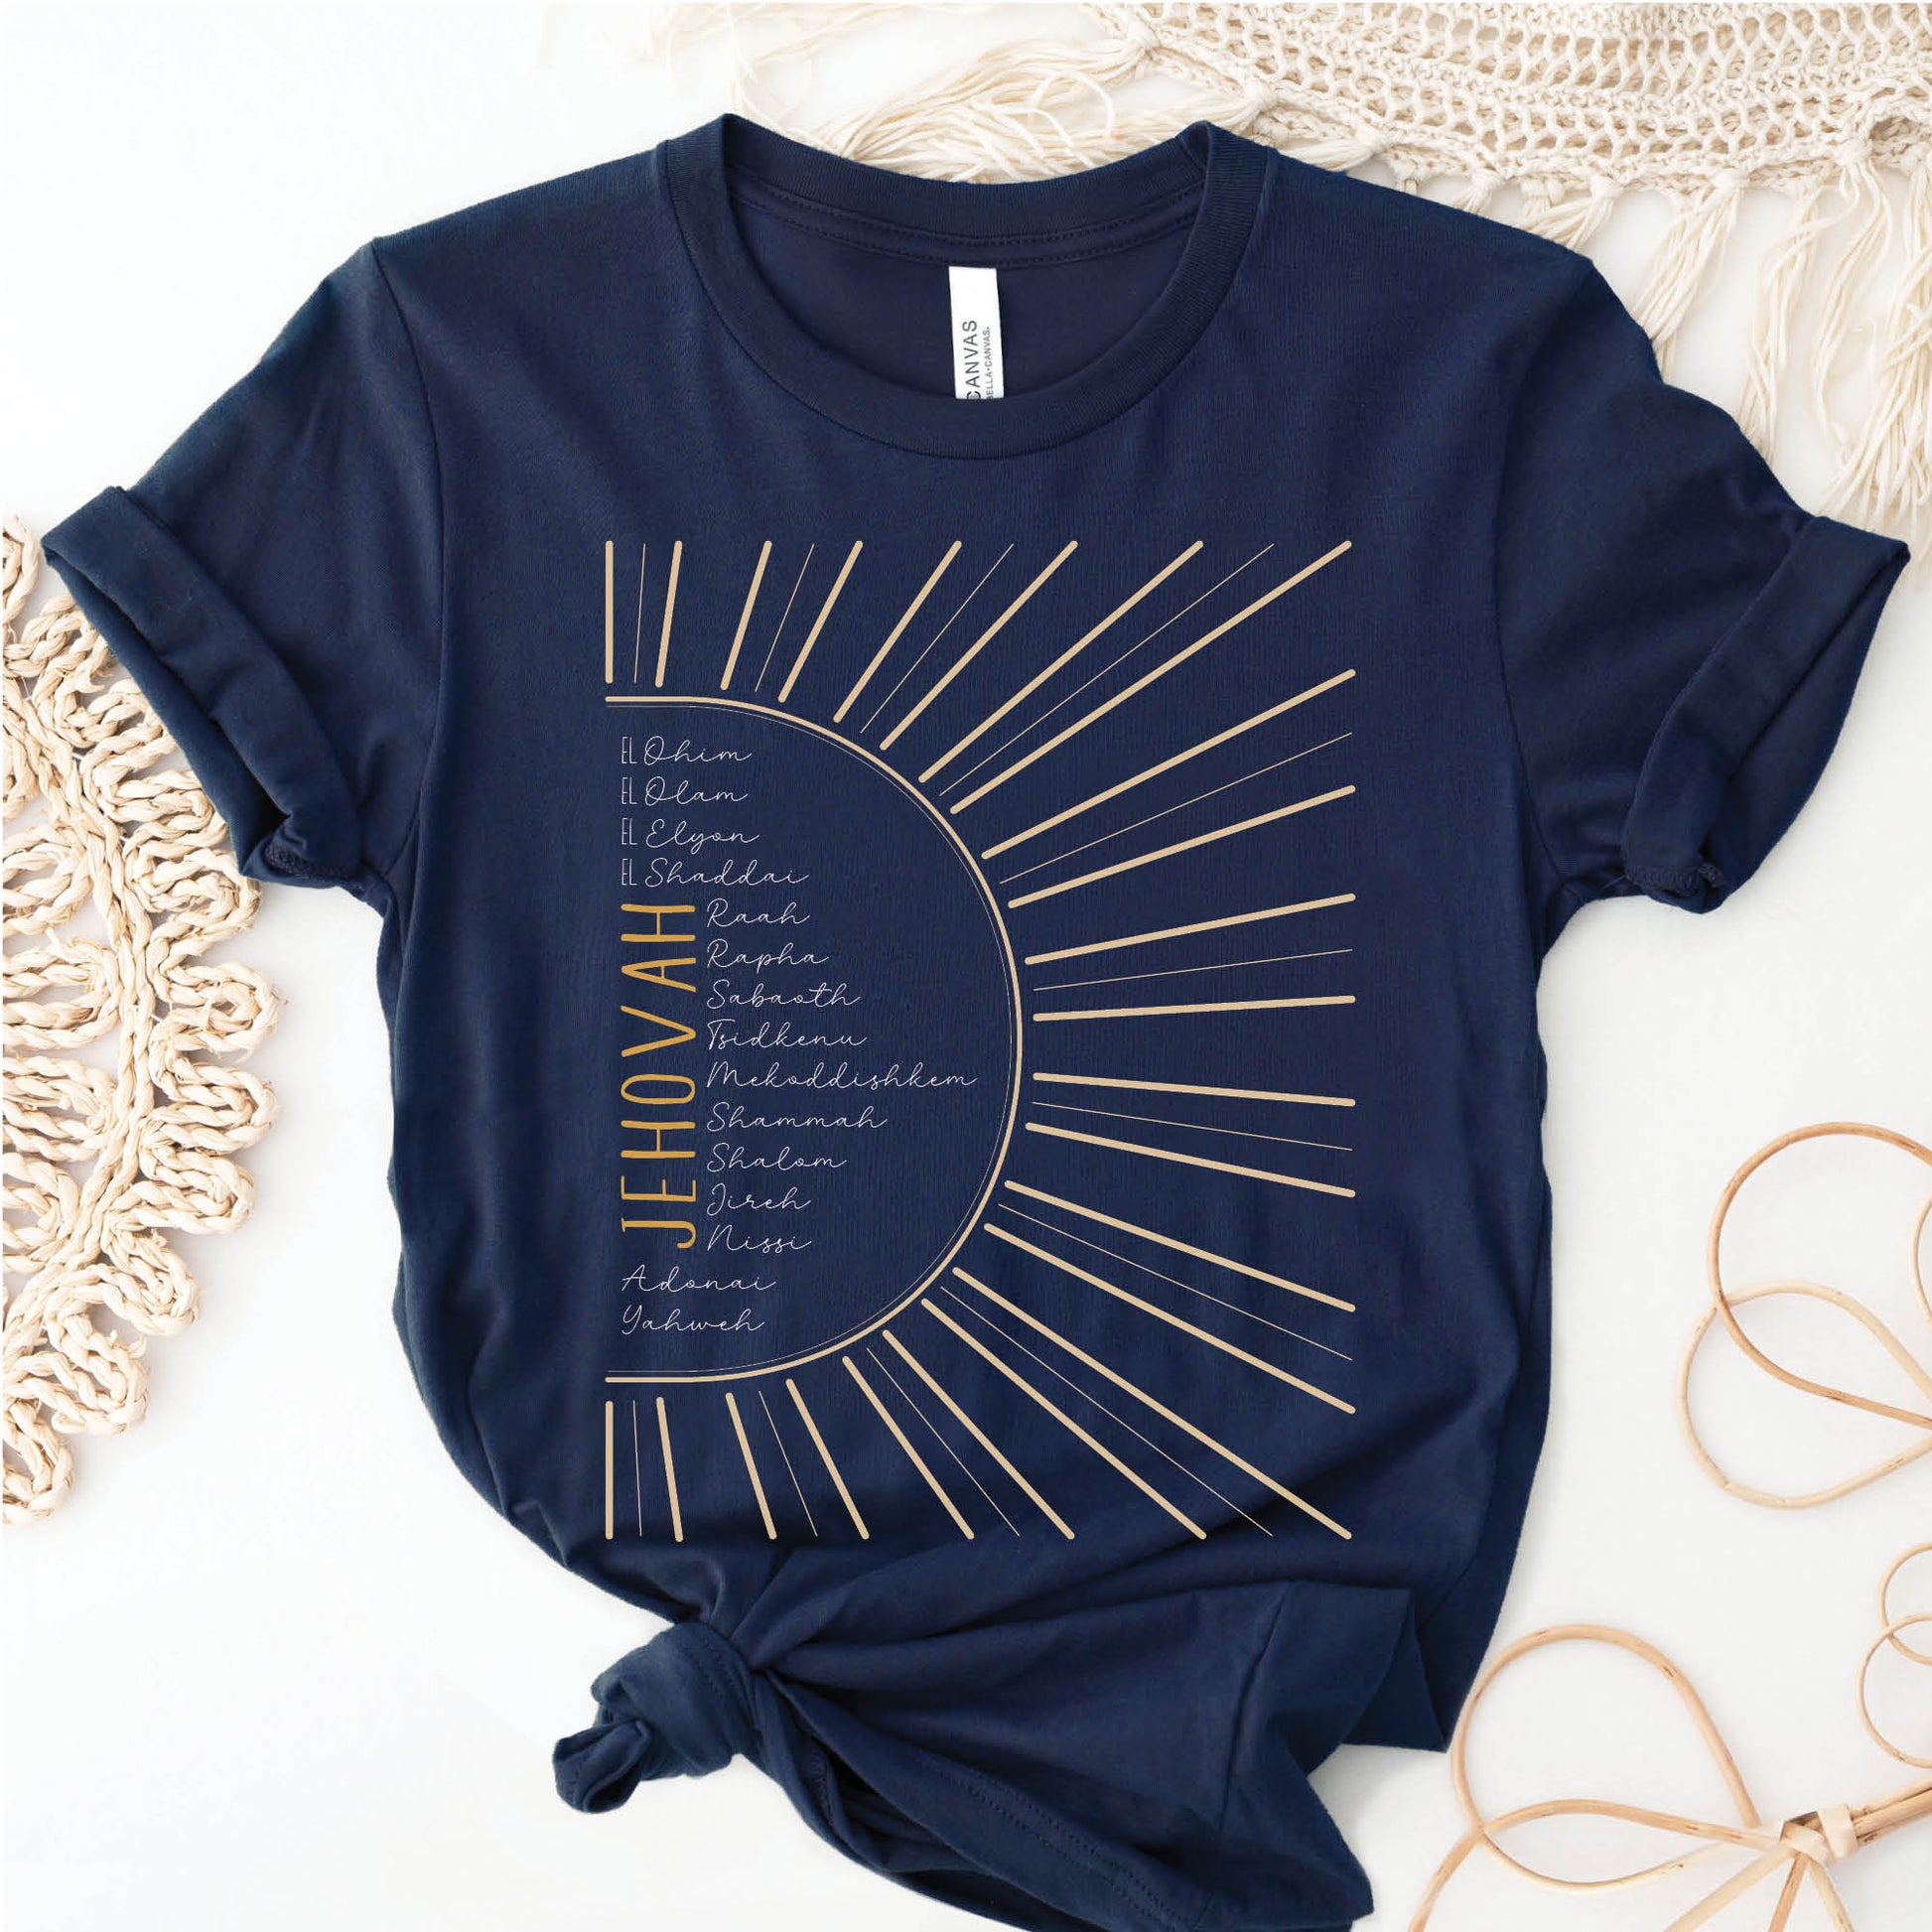 The Names of God Hebrew Christian Old Testament Bible List Sunshine T-Shirt, printed in gold and white on Navy Blue Bella-Canvas 3001 t-shirt, women's soft unisex fit regular and plus size tee